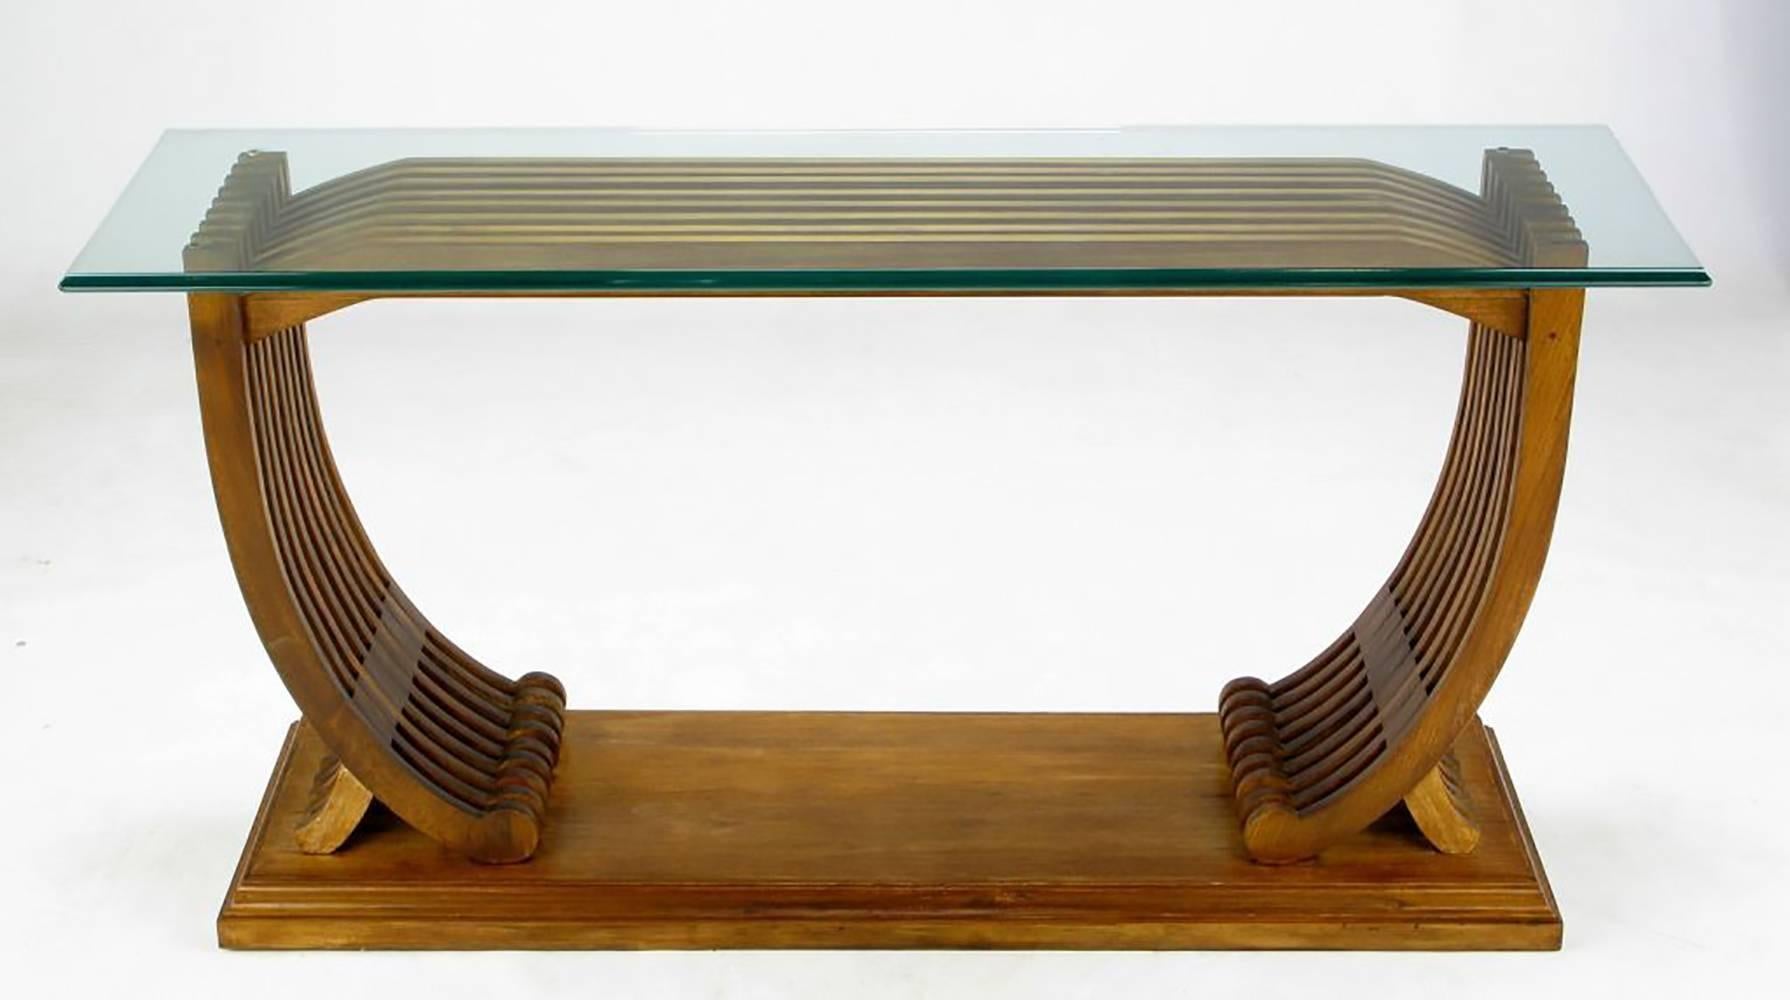 American Studio Crafted Teak and Glass Shipwright Console Table